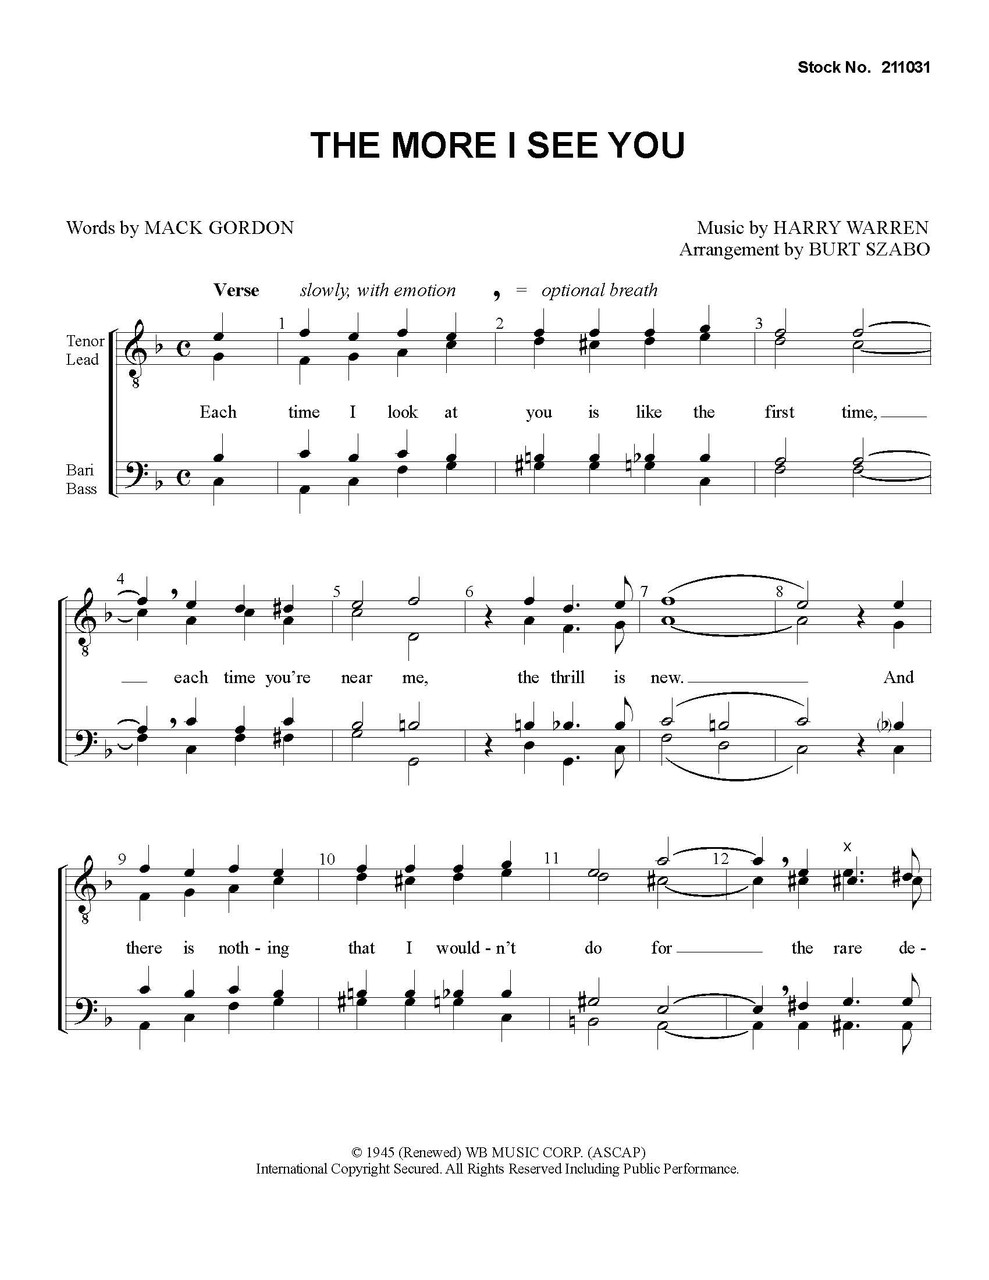 The More I See You (TTBB) (arr. Szabo) - SPECIAL ORDER